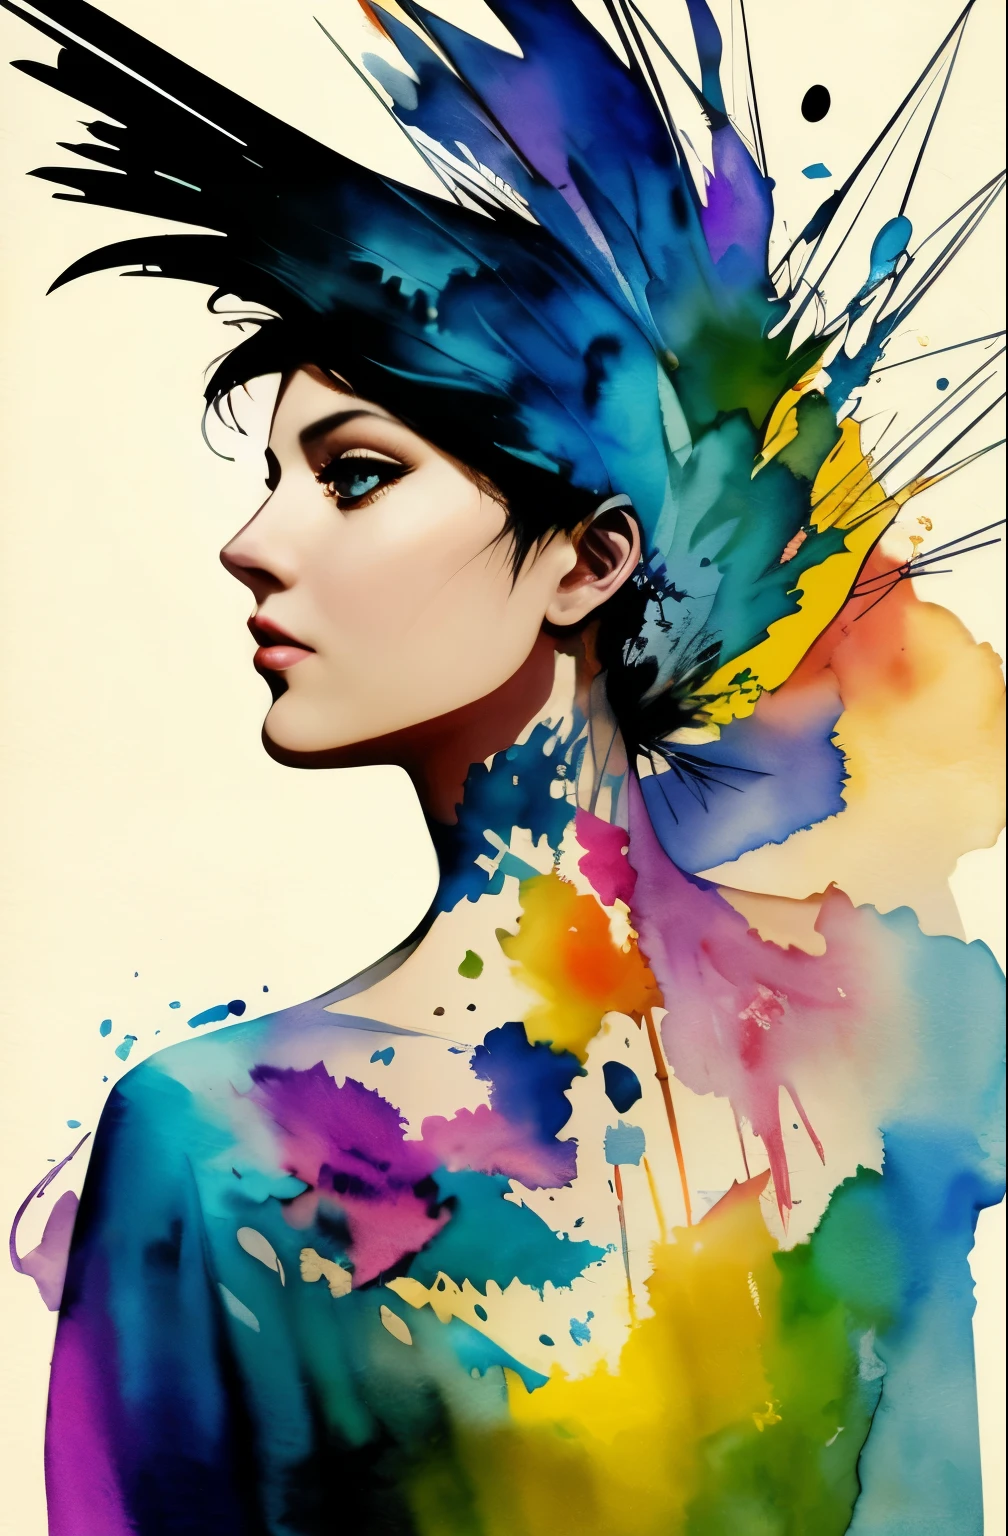 painting of woman, tumbler, figurative art, Intense watercolor painting, watercolor detailed art, Watercolor Splash, surreal, Avant-garde pop art, Beautiful and expressive paintings, Beautiful artwork illustration, very colorful tones, wonderful, birdland lullaby, cool beauty, highest quality,official art, women only, sharp outline, best shot, vector art, Written by Sandra Chevrier, Dave McKean、by Richard Avedon、Written by Makiezi Kusiala, luminous design